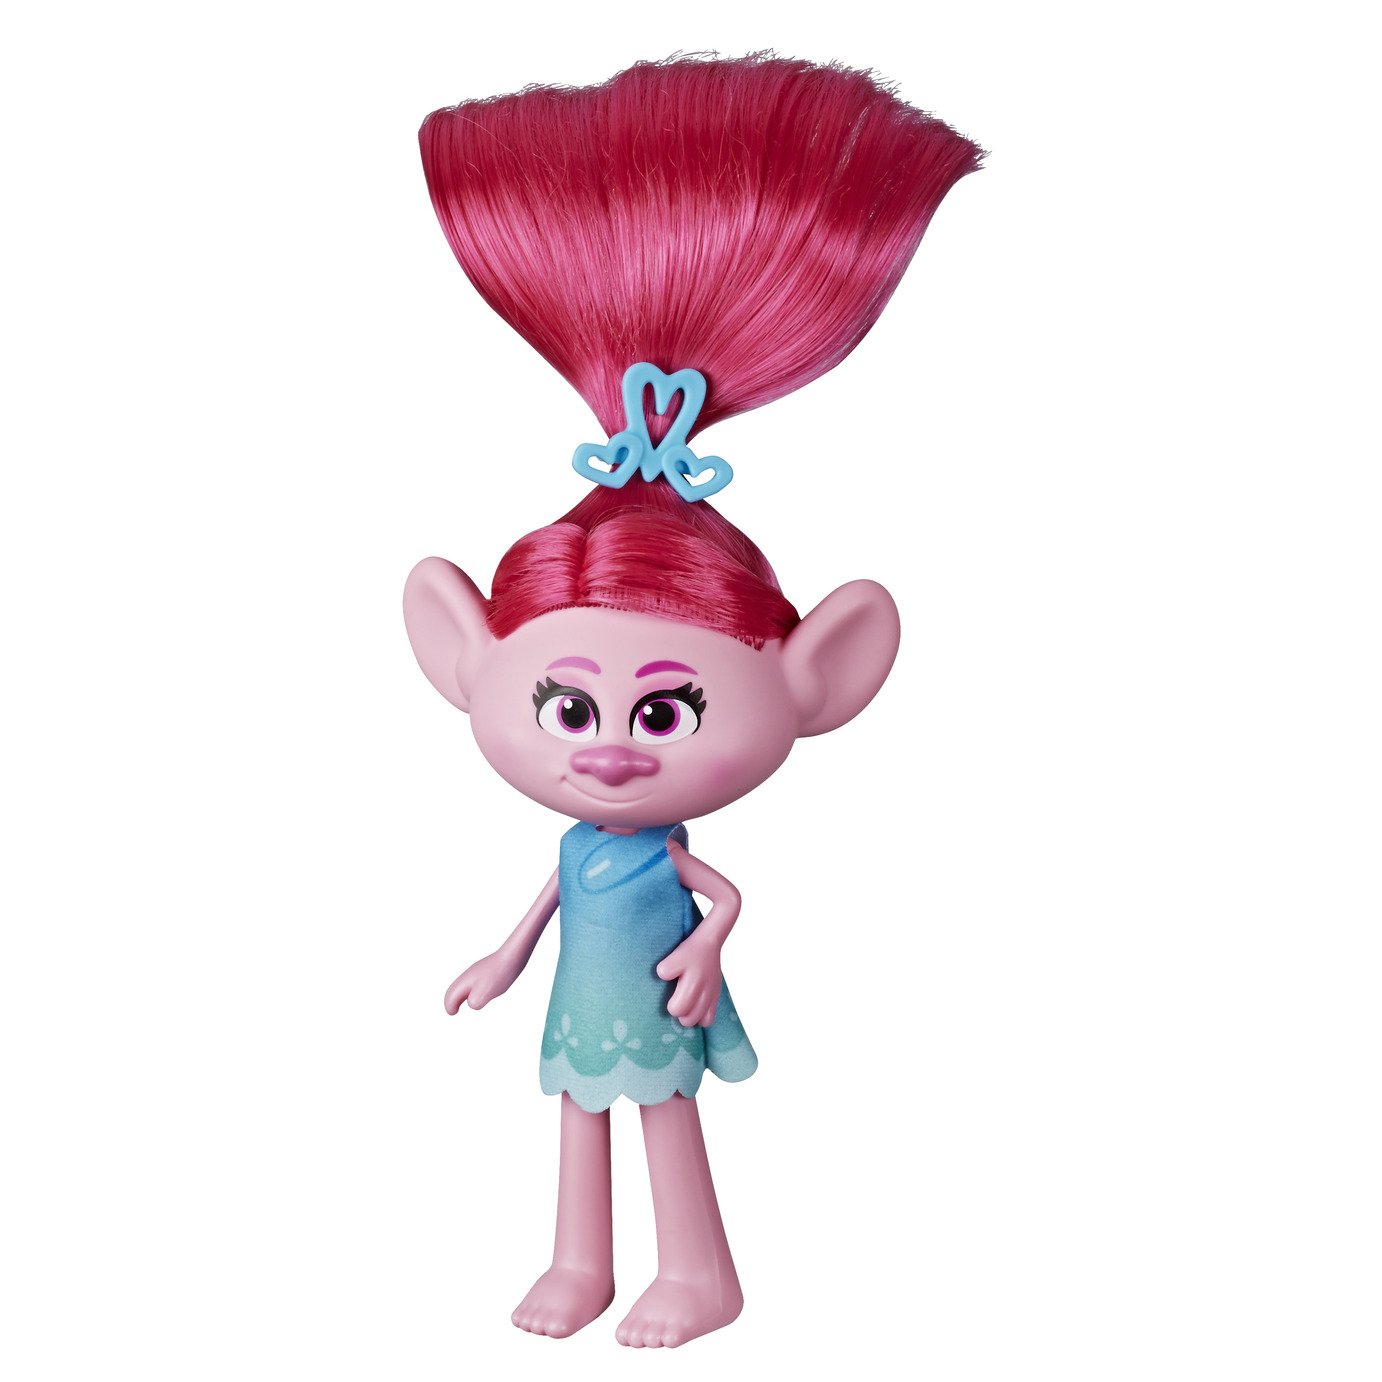 trolls toys for 3 year old